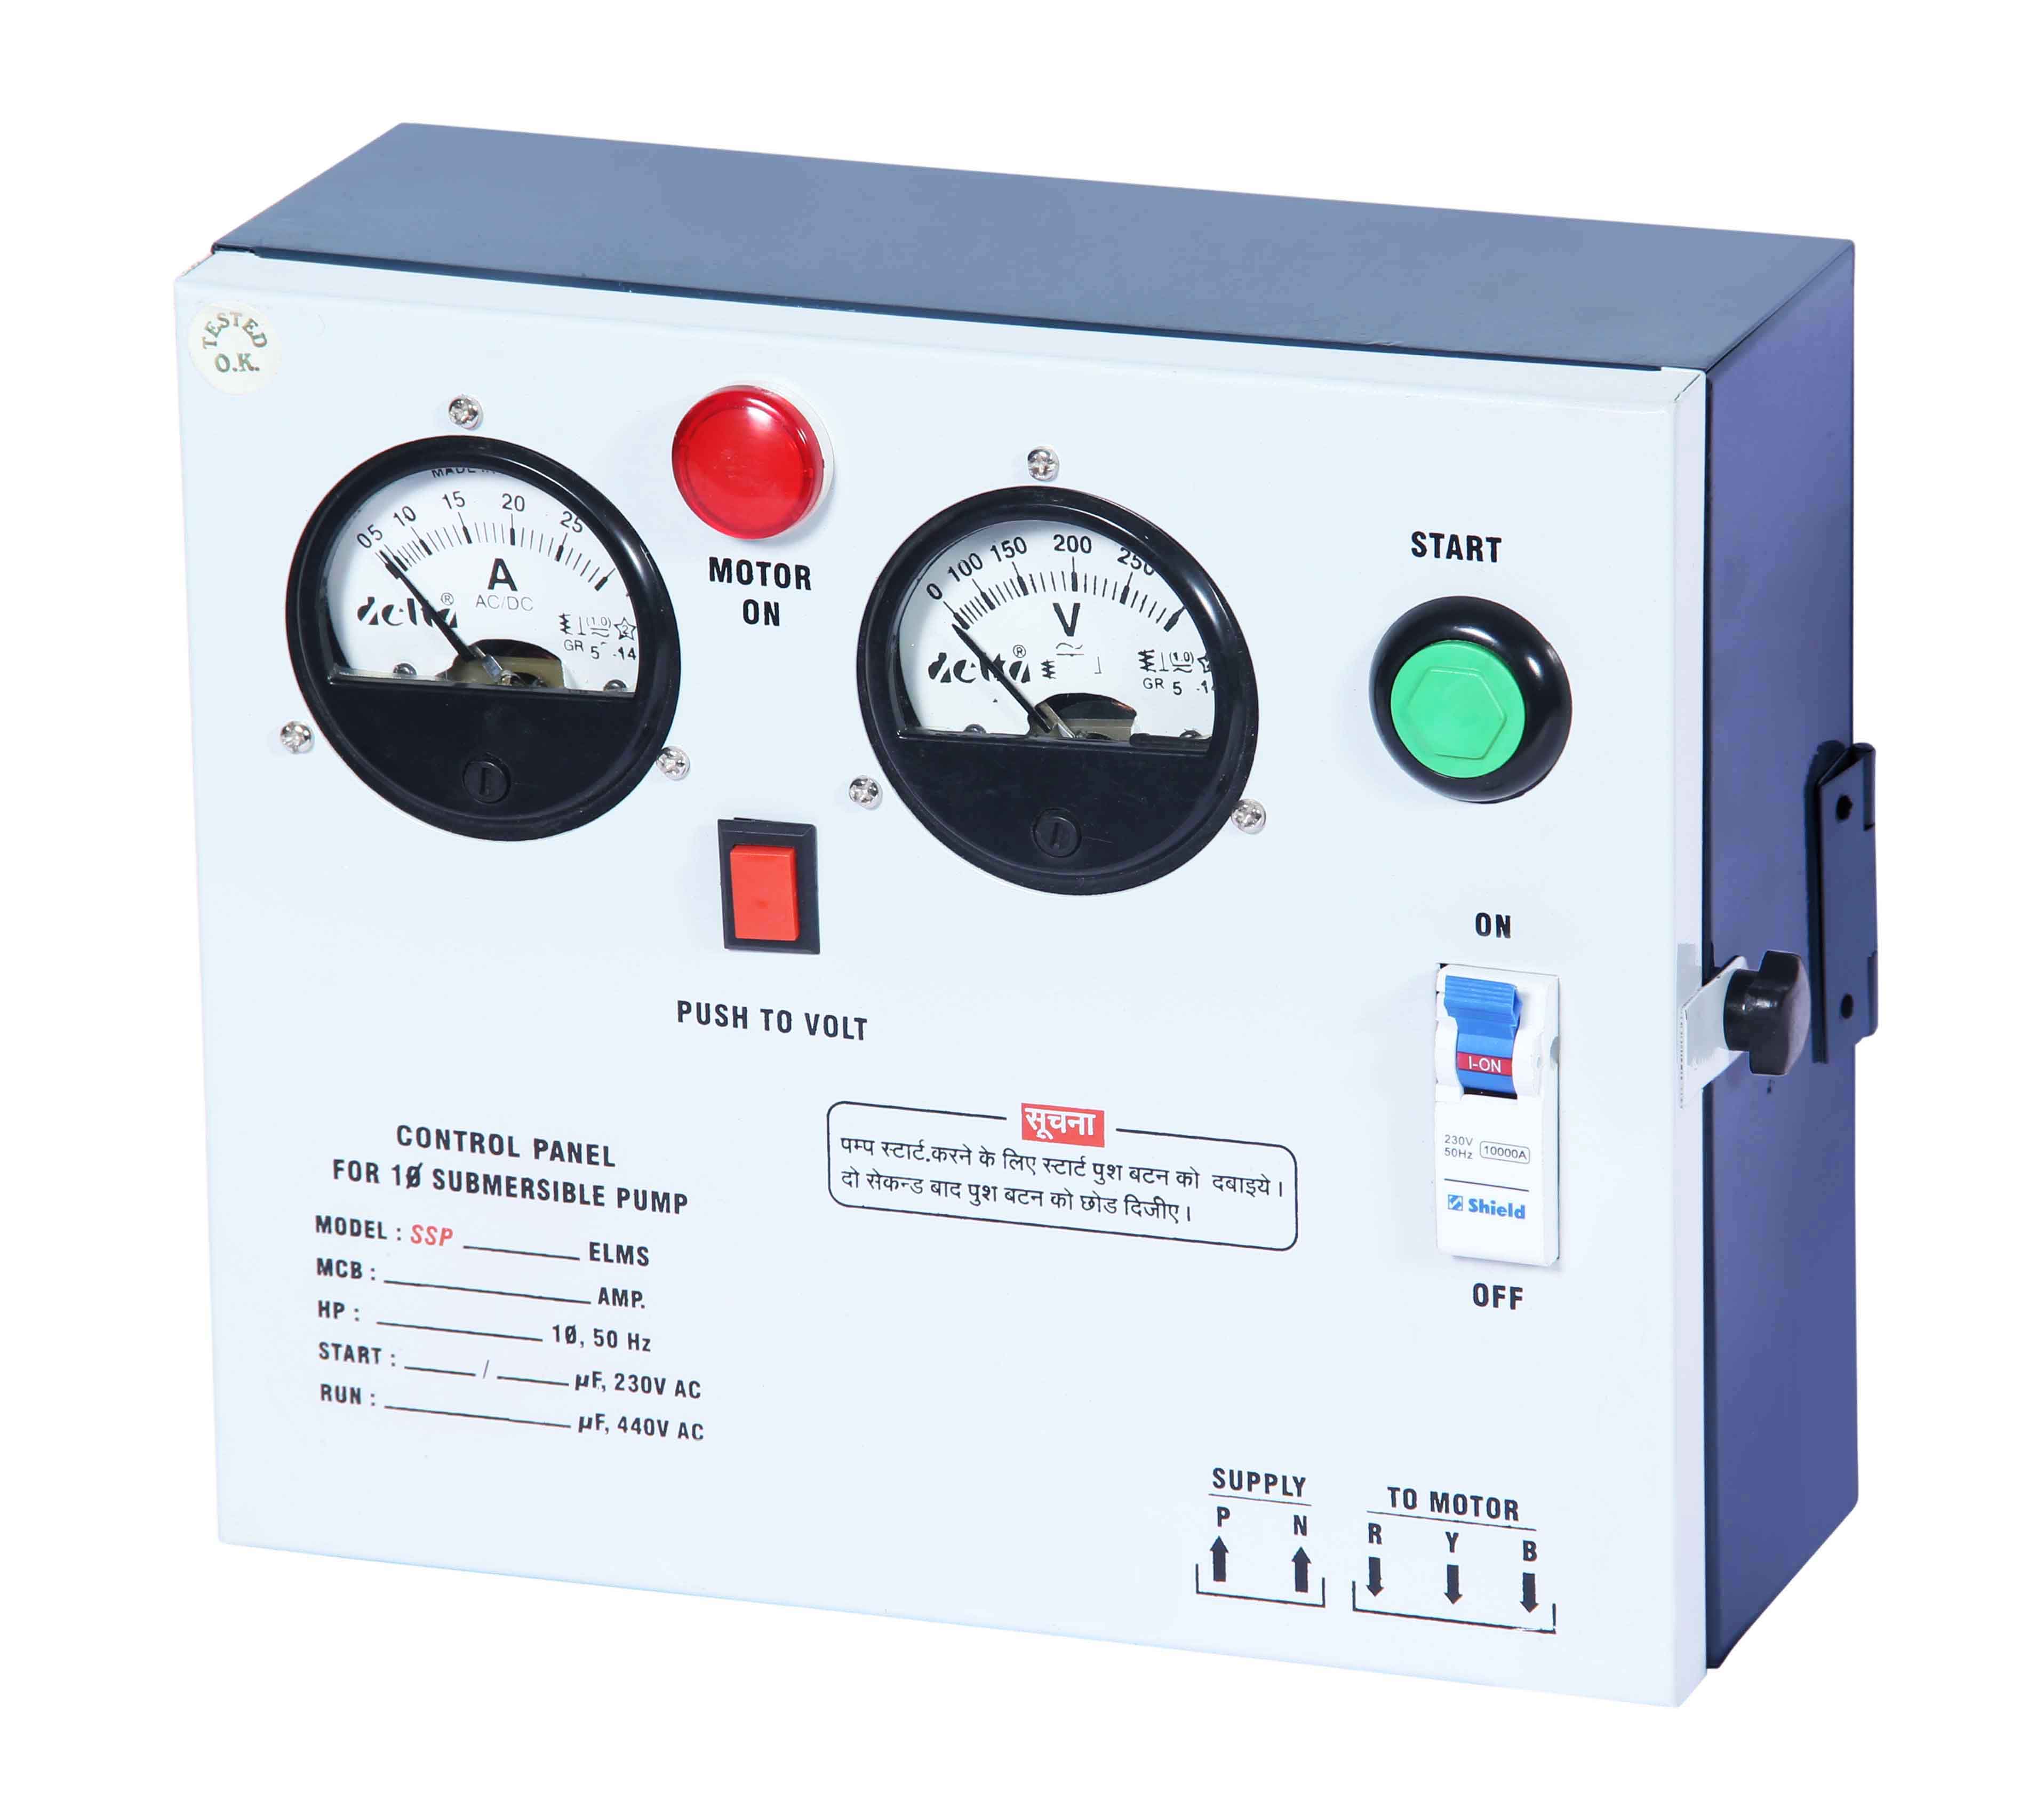 ELMS Single phase motor starter suitable for 3 HP submersible motor with overload protections by MCB